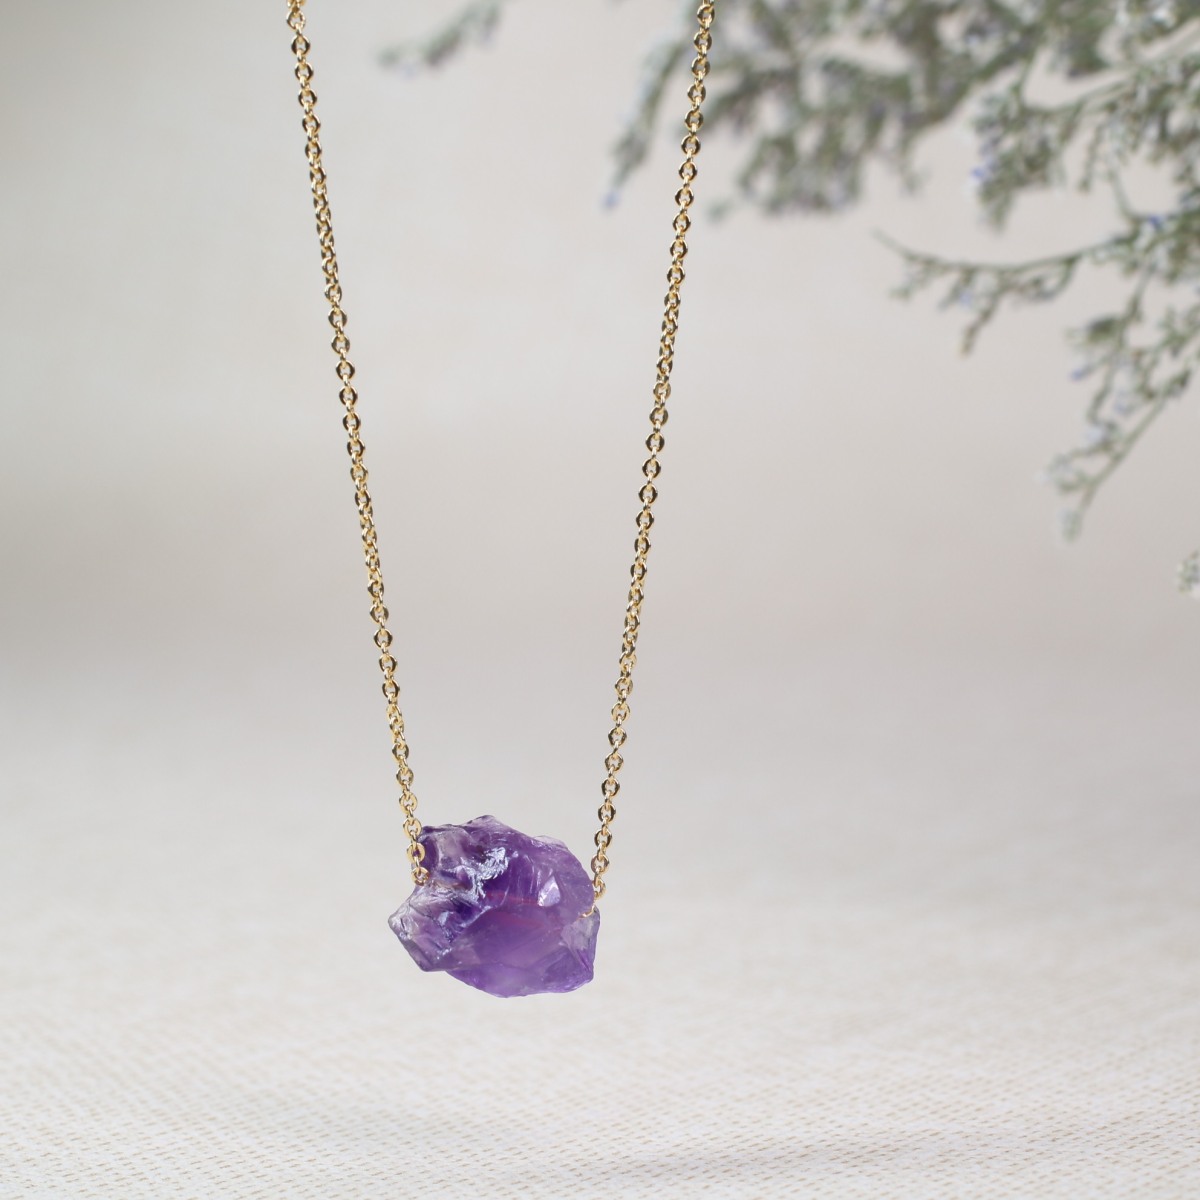 COAI-Raw-Amethyst-Crystal-Pendant-Necklace-for-Women